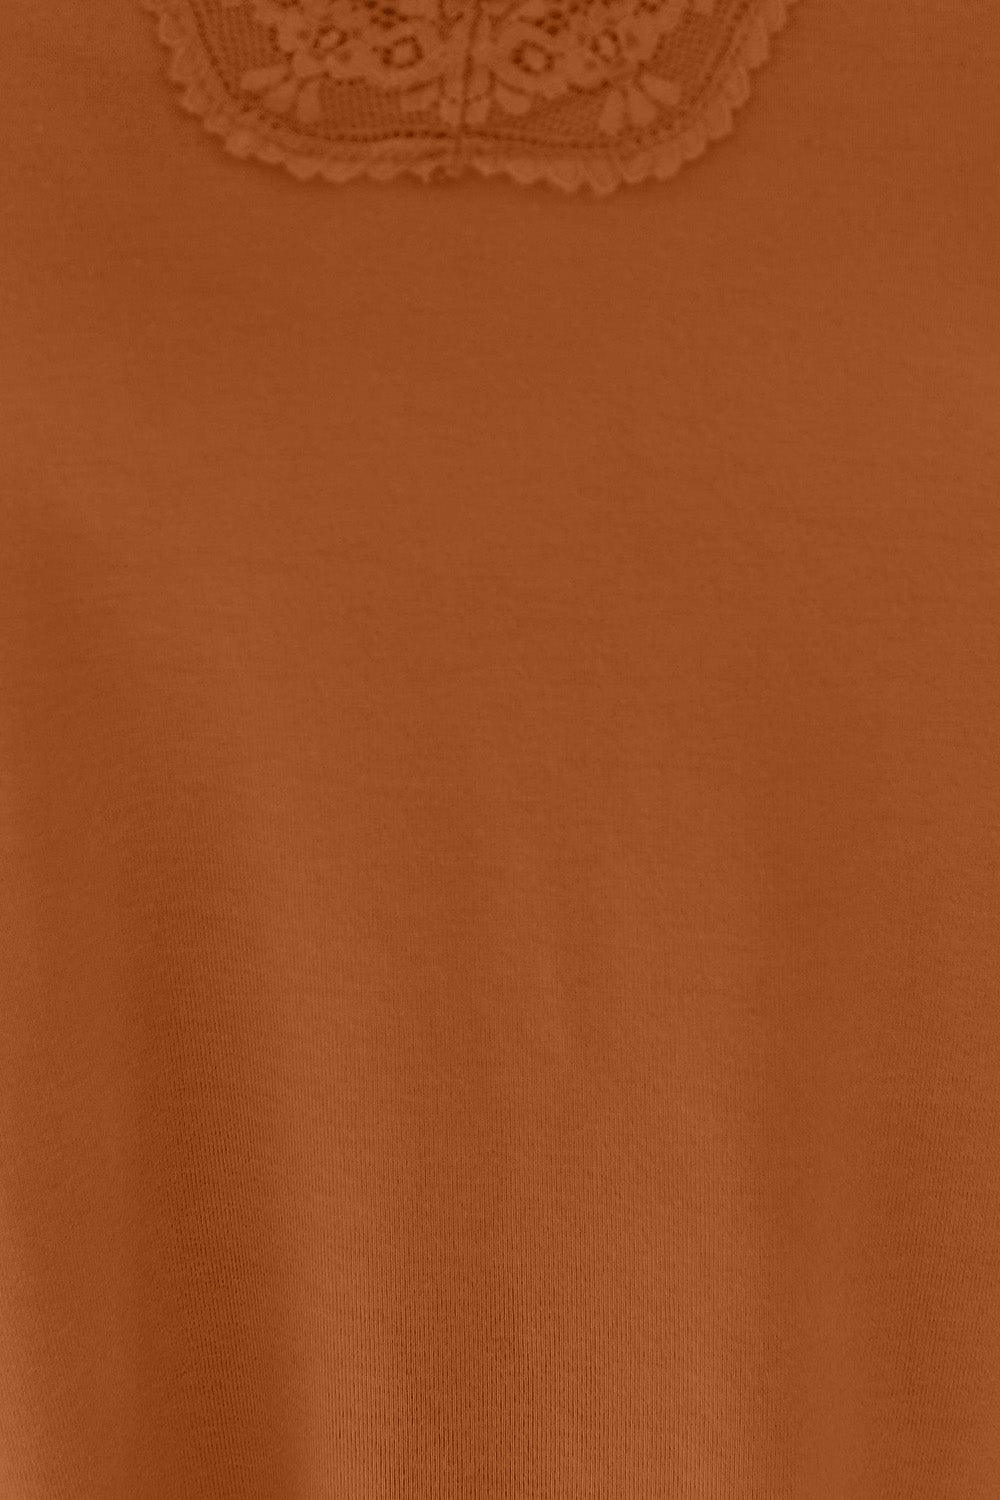 a close up of a person wearing a brown shirt